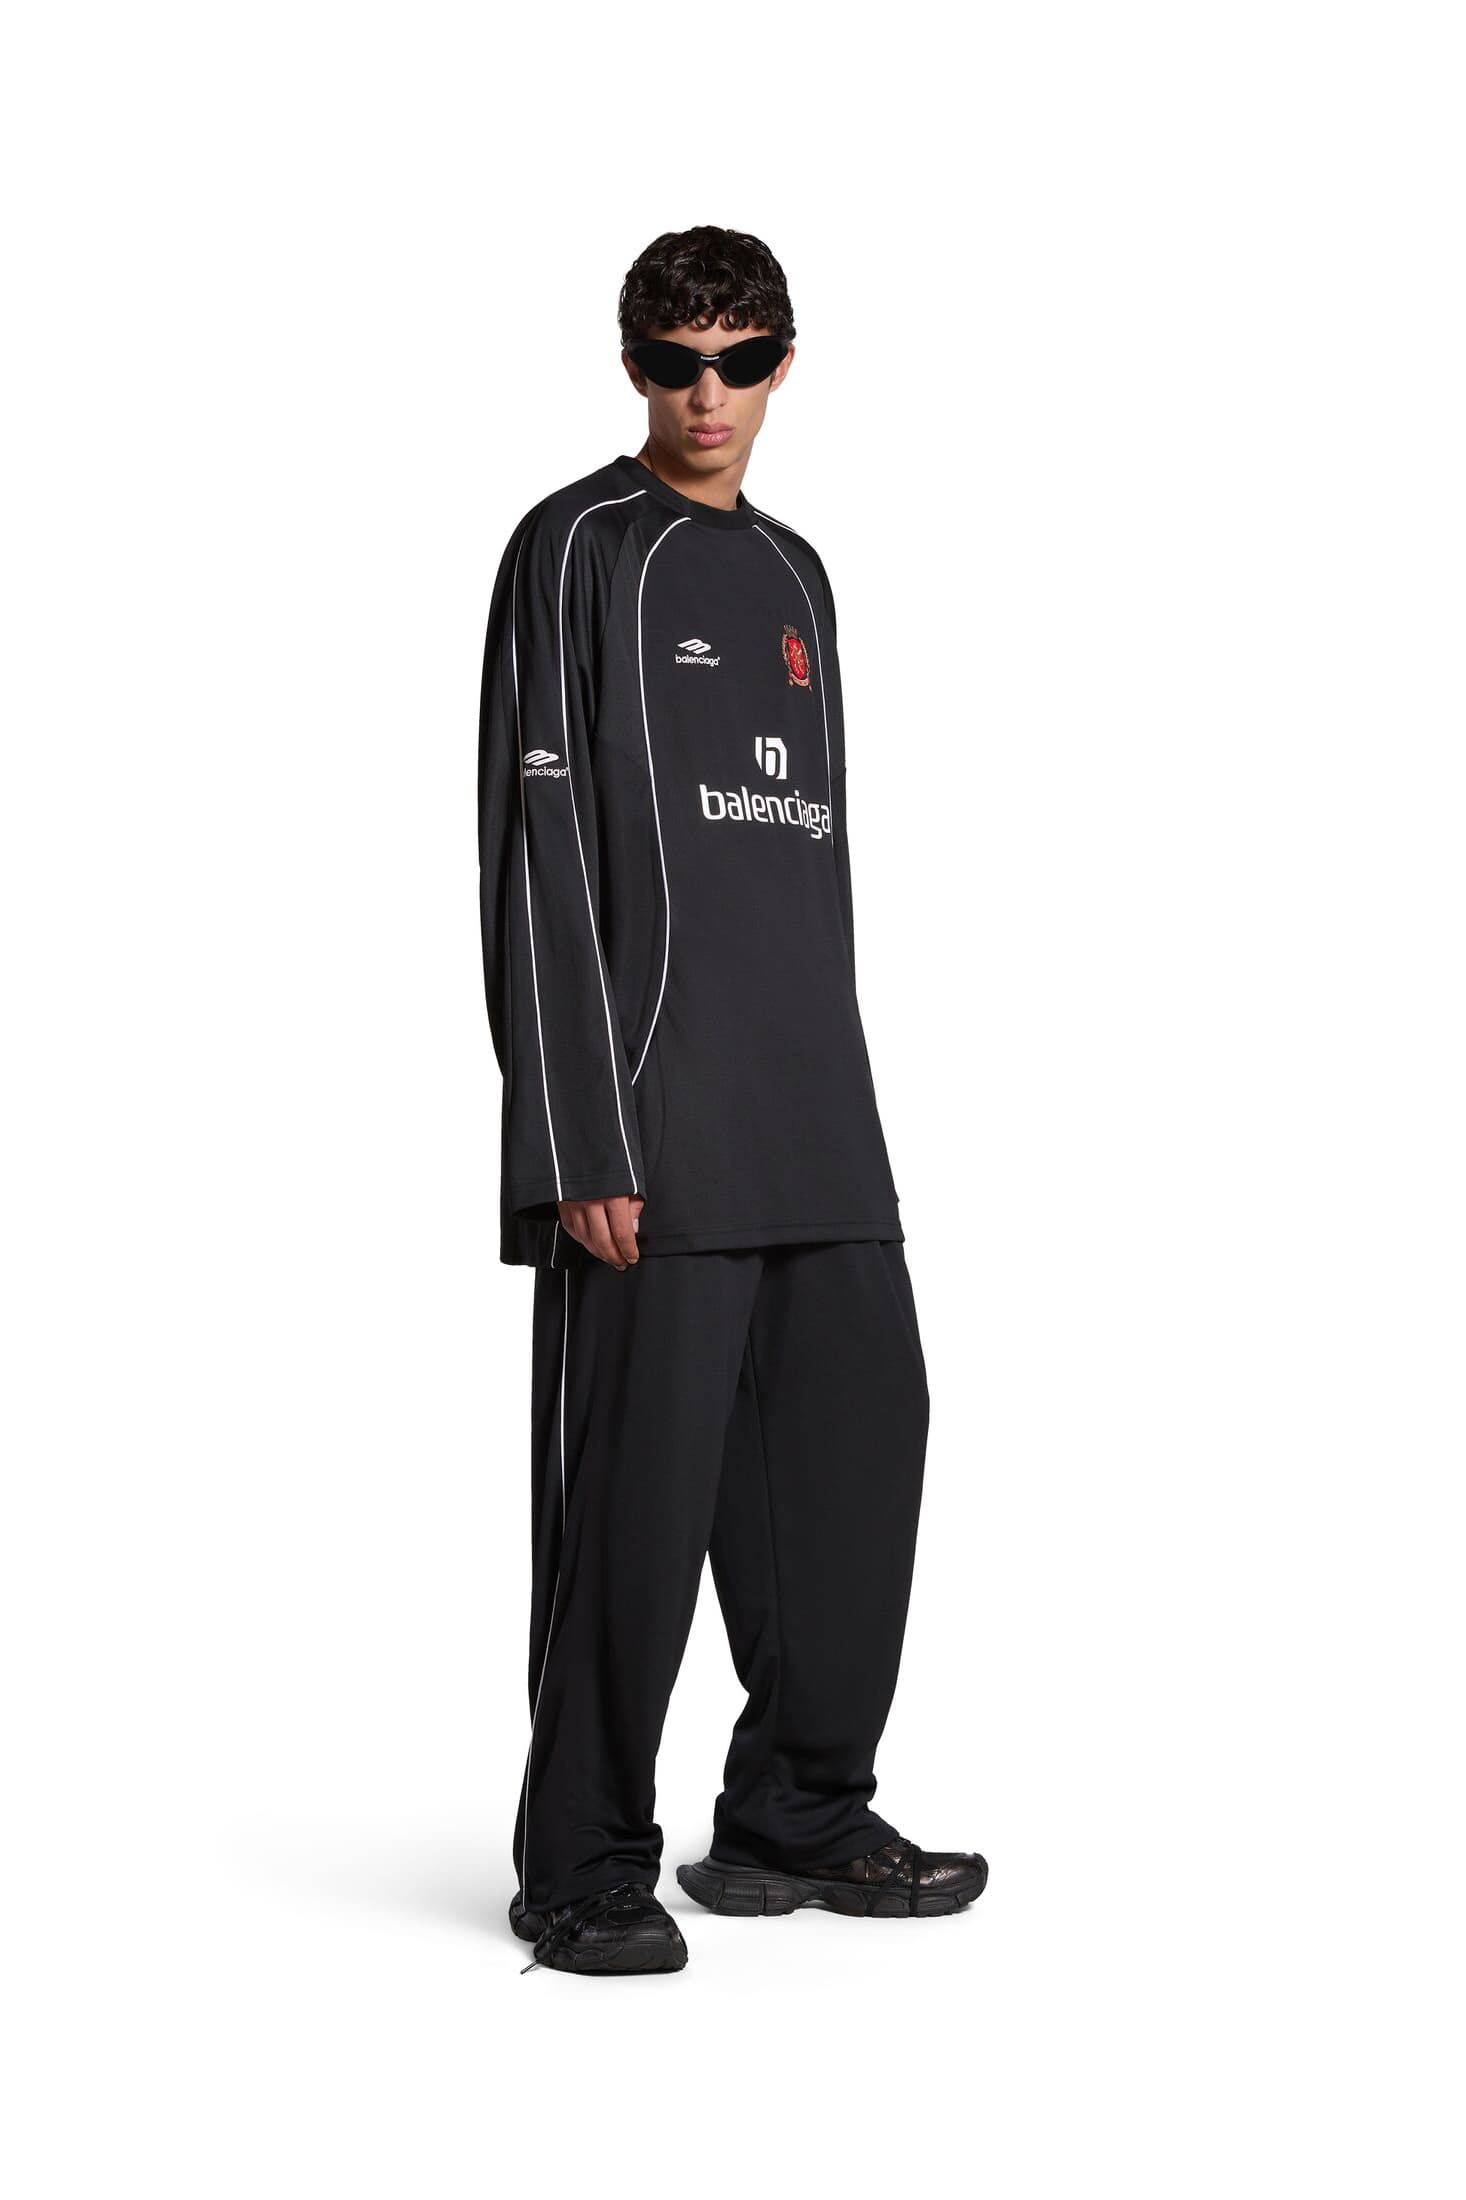 Balenciaga Unveils Limited-Edition Soccer Collection | The Impression